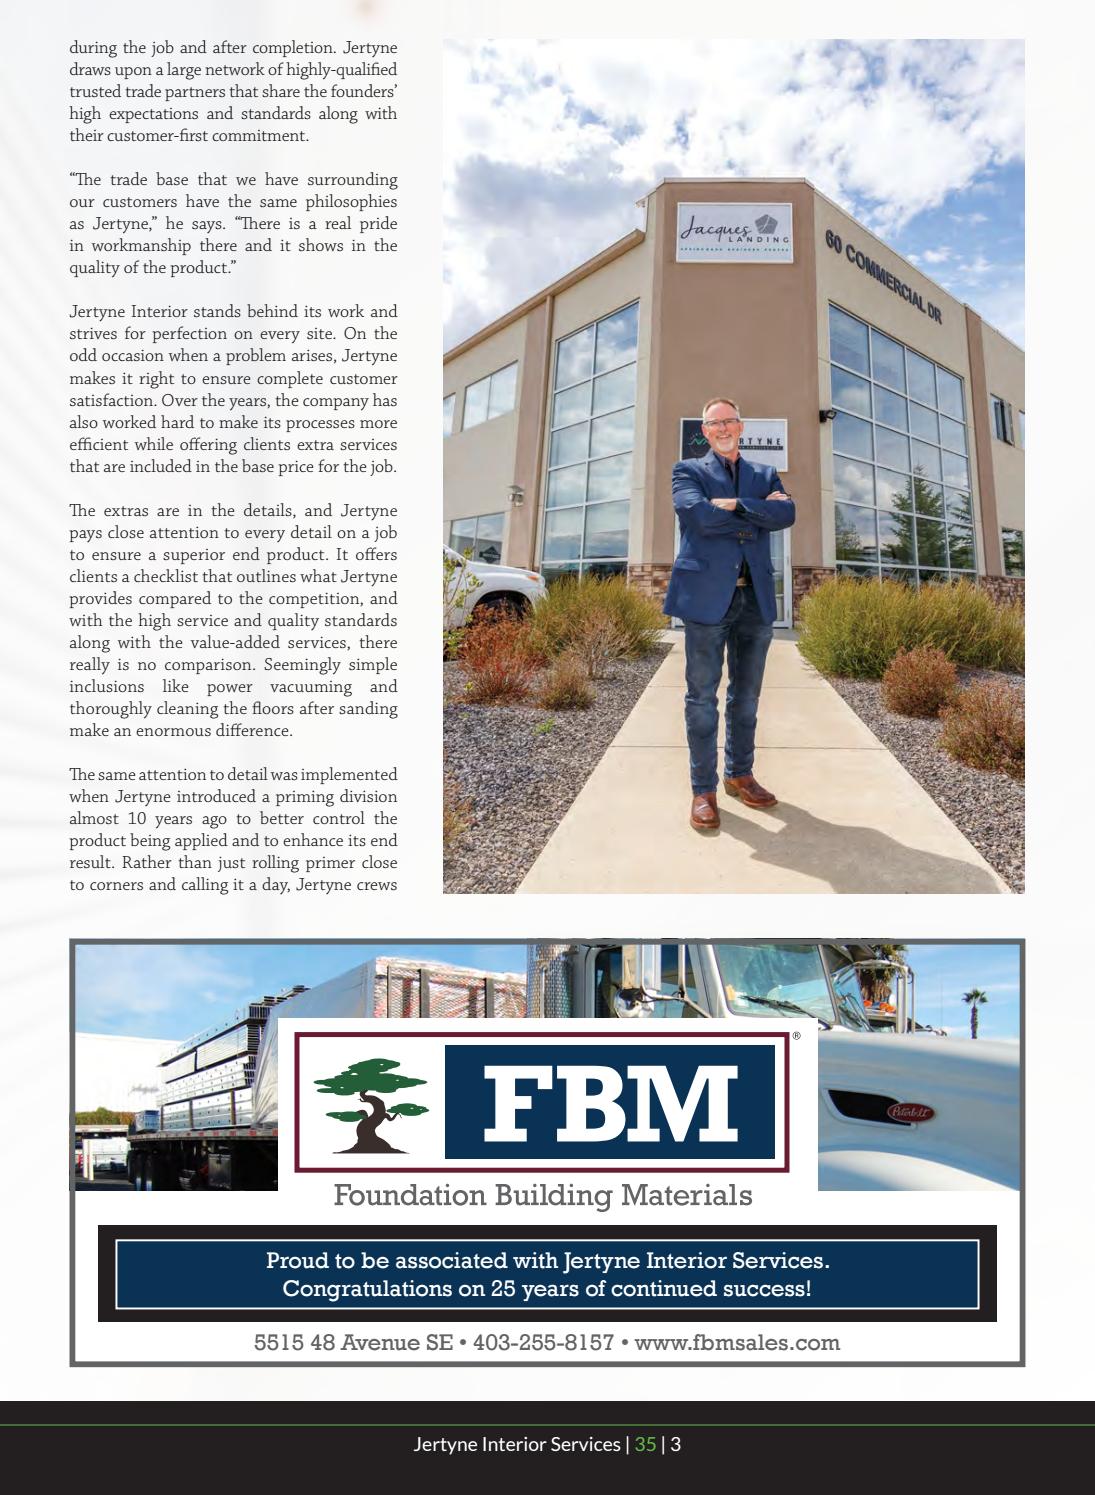 Business in Calgary Magazine - Business Profile for Jertyne Interior Services